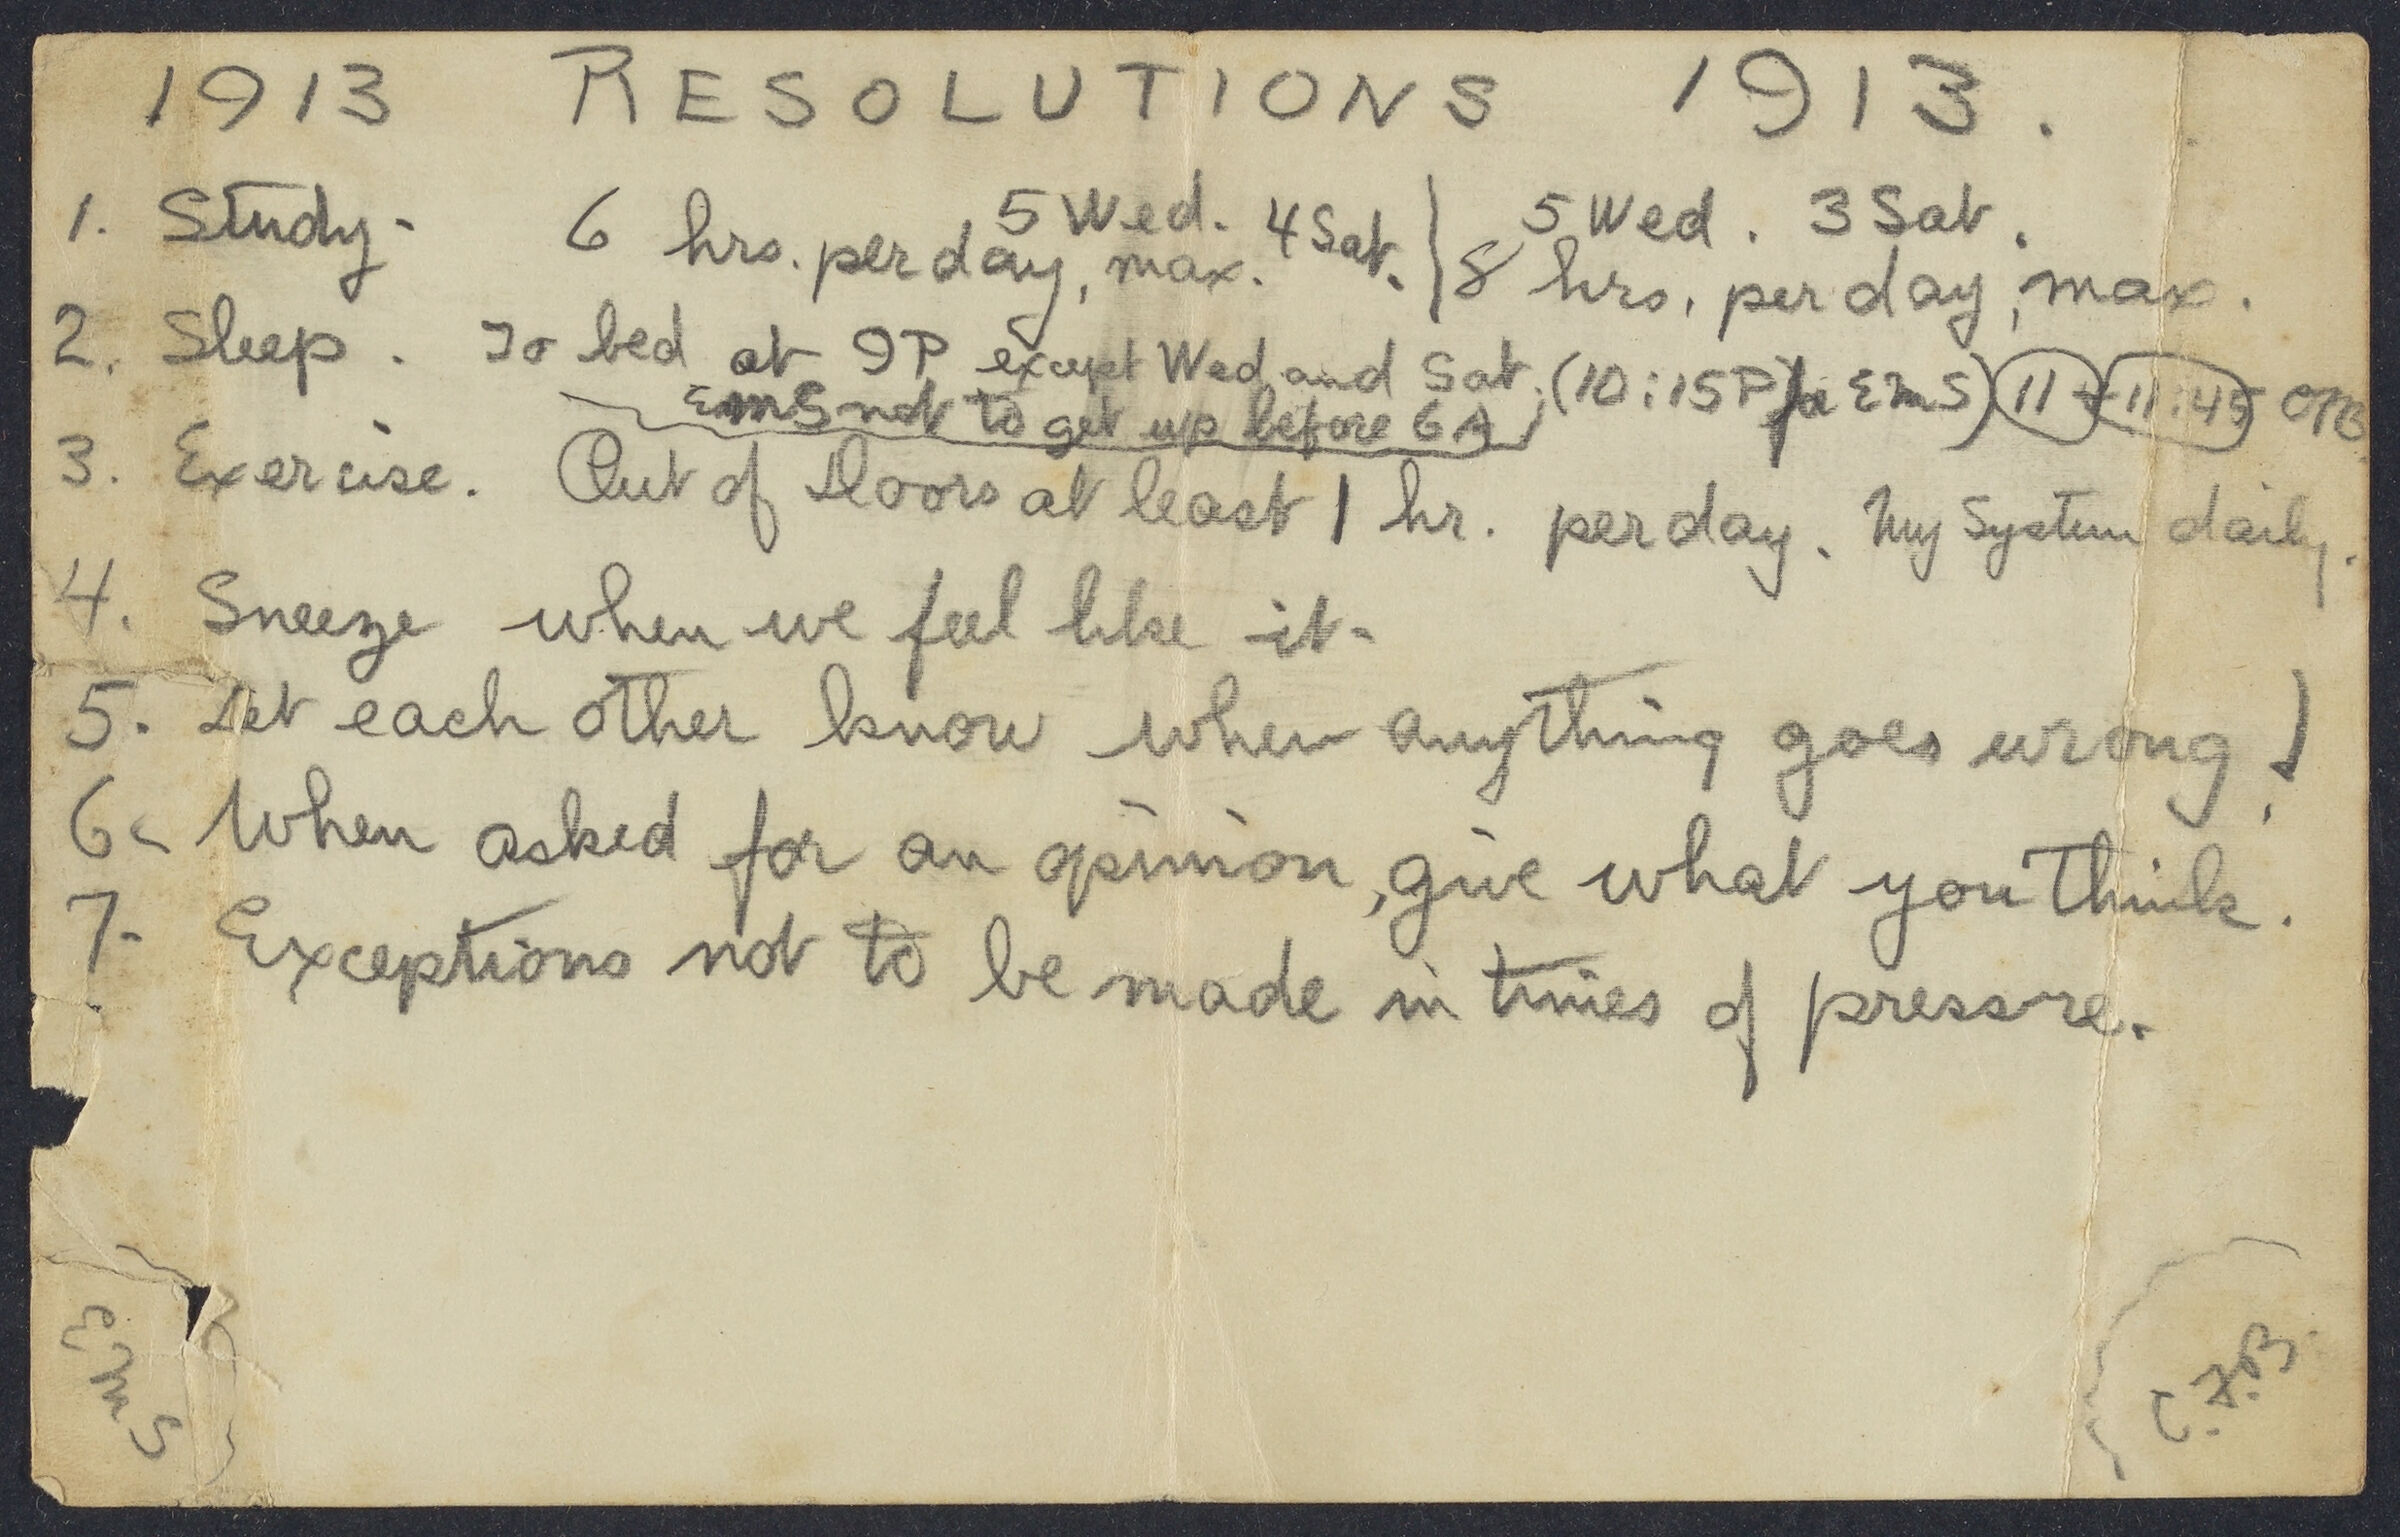 Letters from Charles Franklin Brooks to Eleanor Stabler Brooks, January 1913